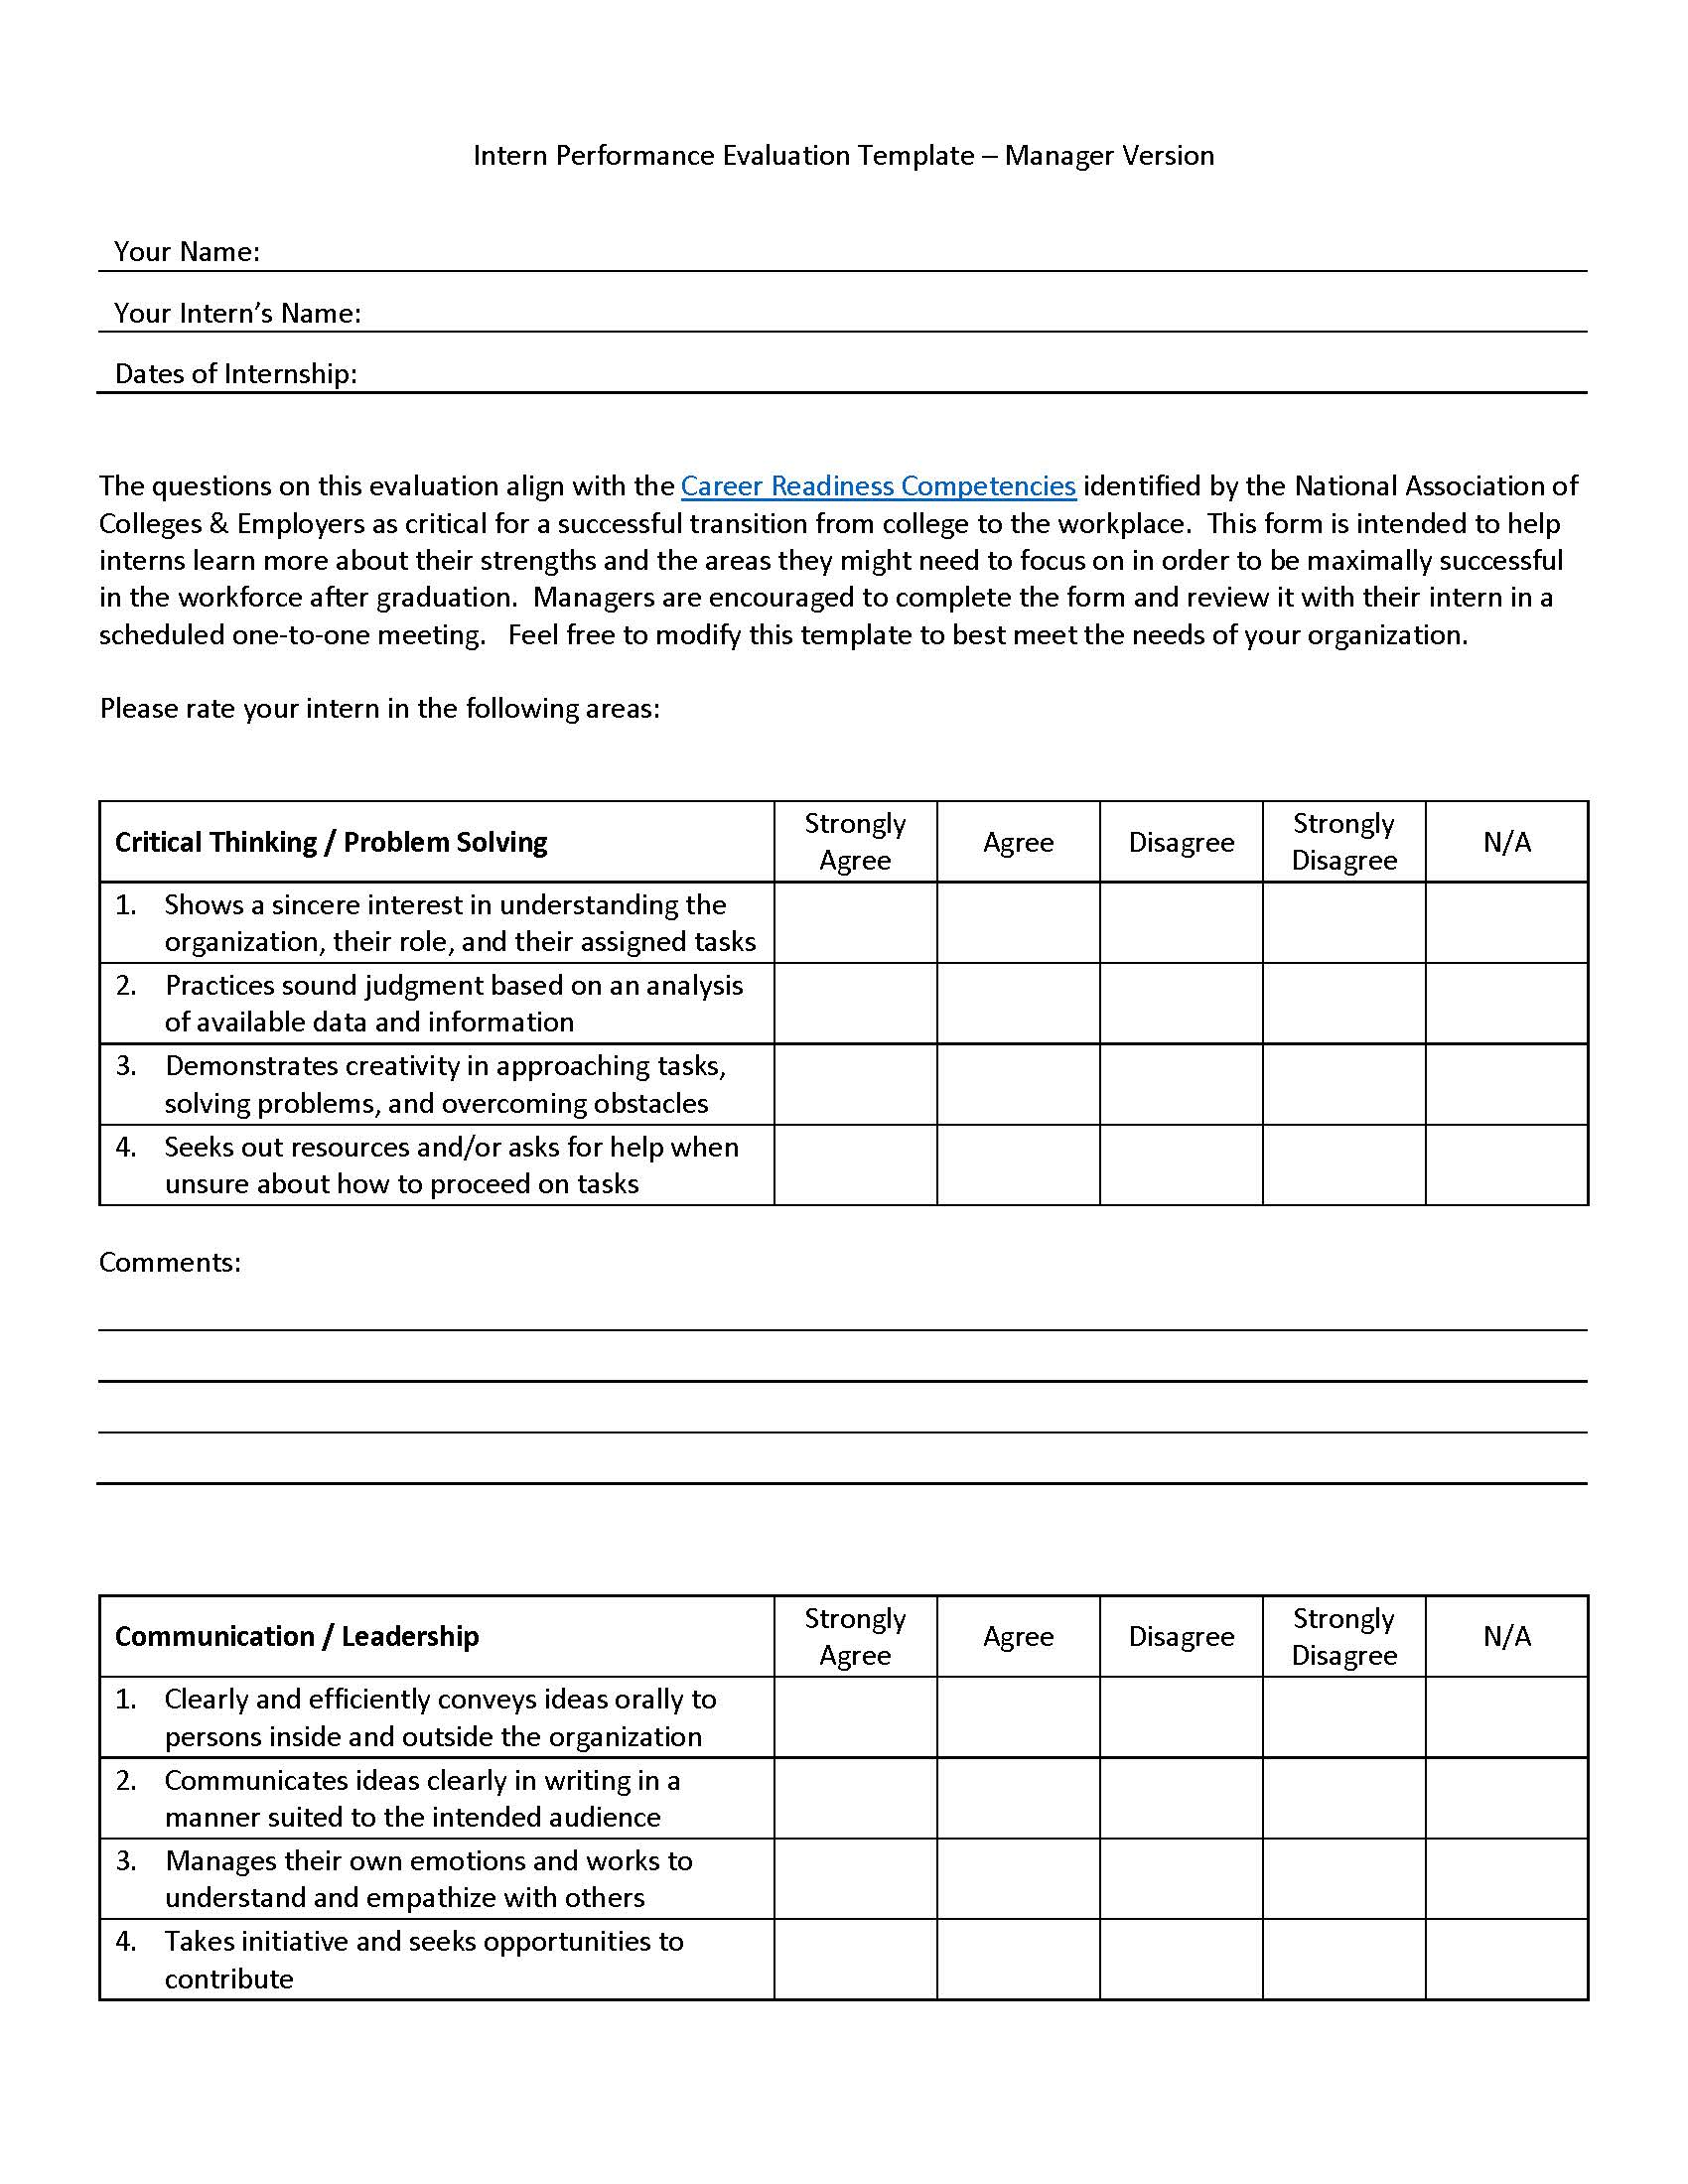 Intern Performance Evaluation Template Manager Version 